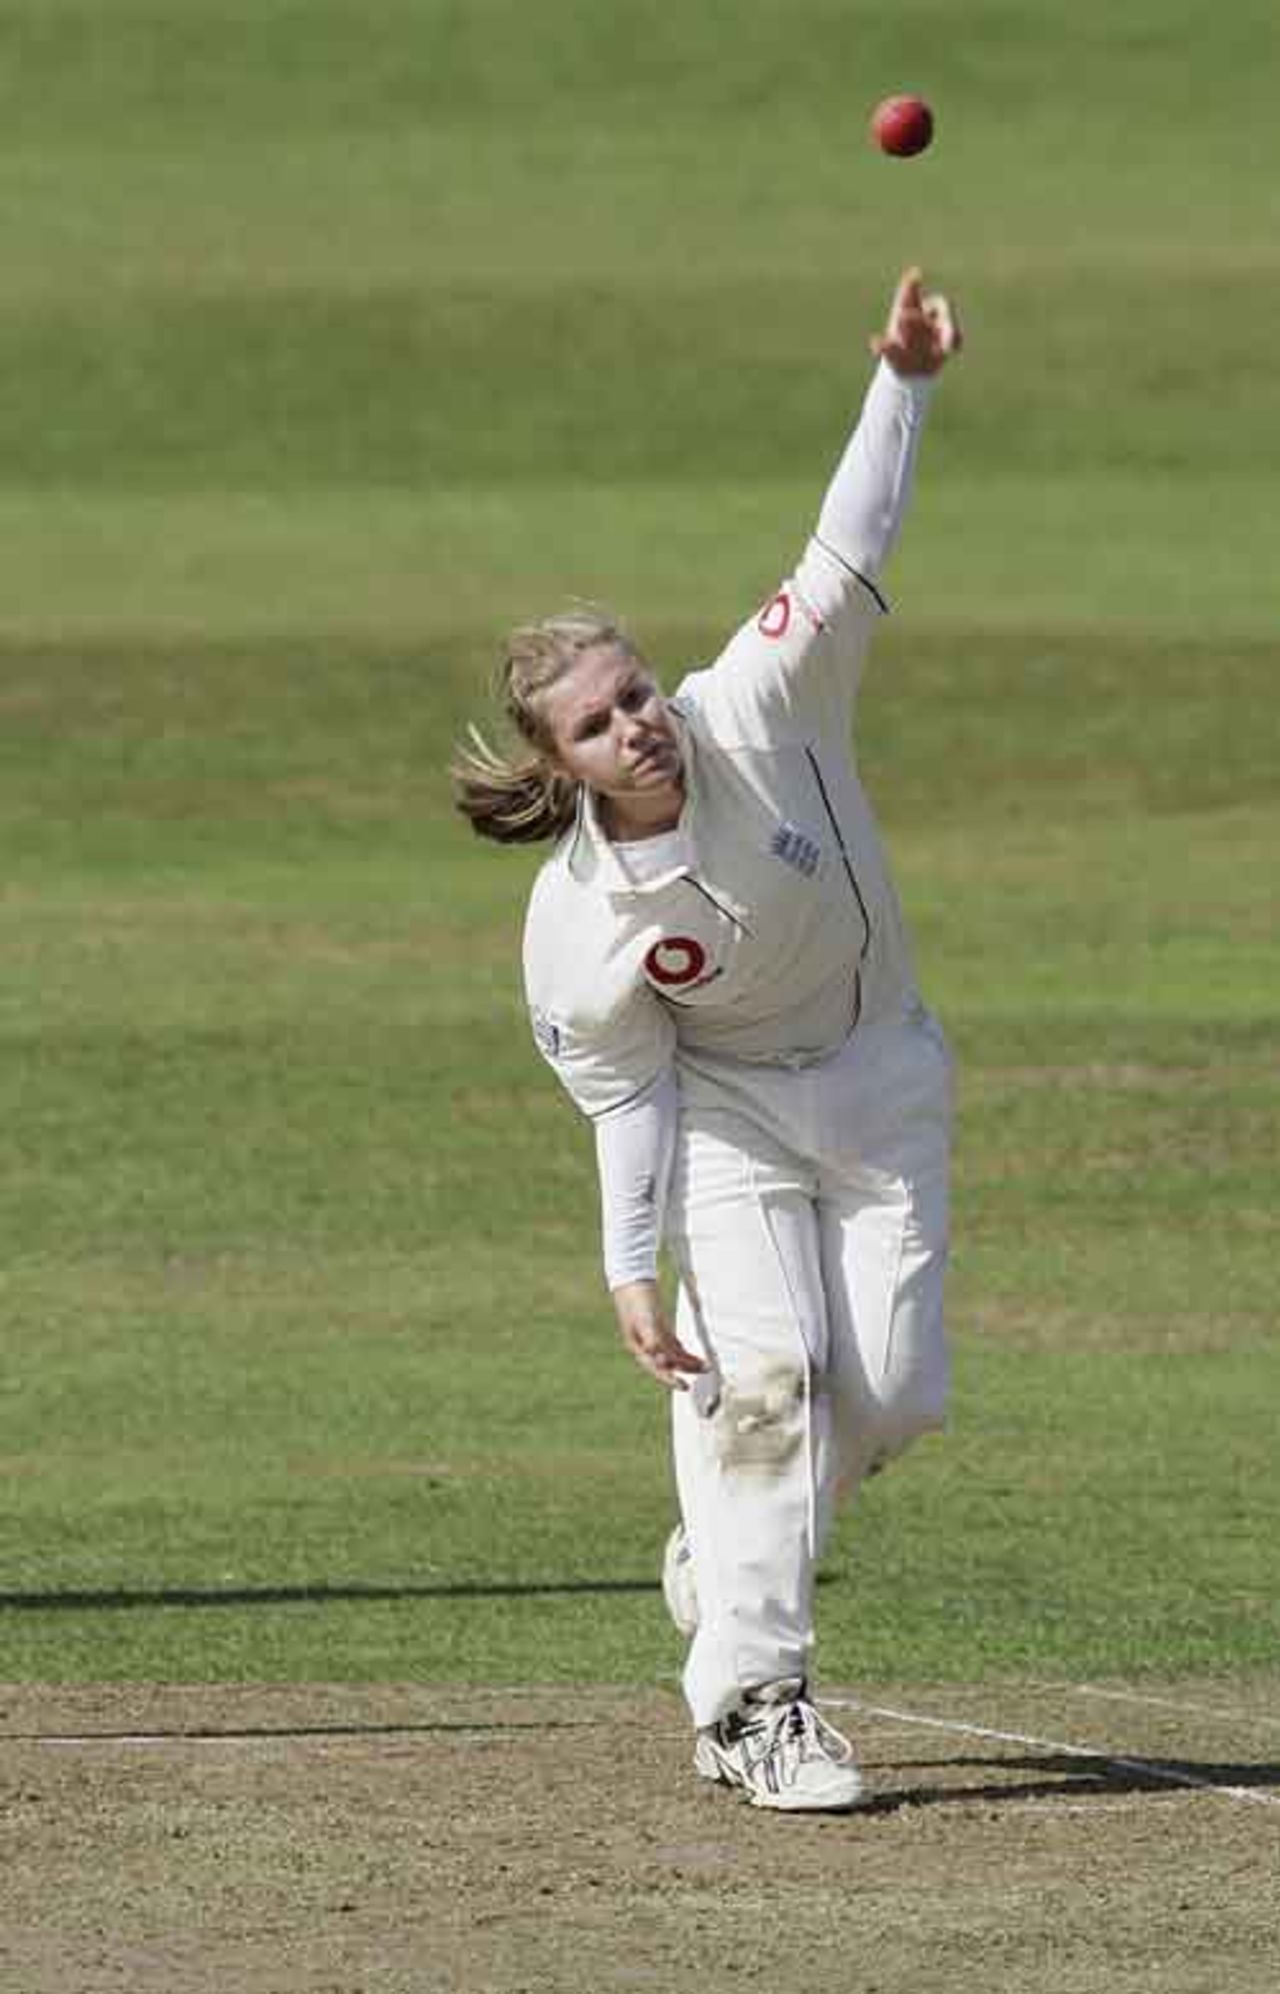 Holly Colvin bowls on the first day of the second Test against India, England Women v India Women, Taunton, August 29 2006